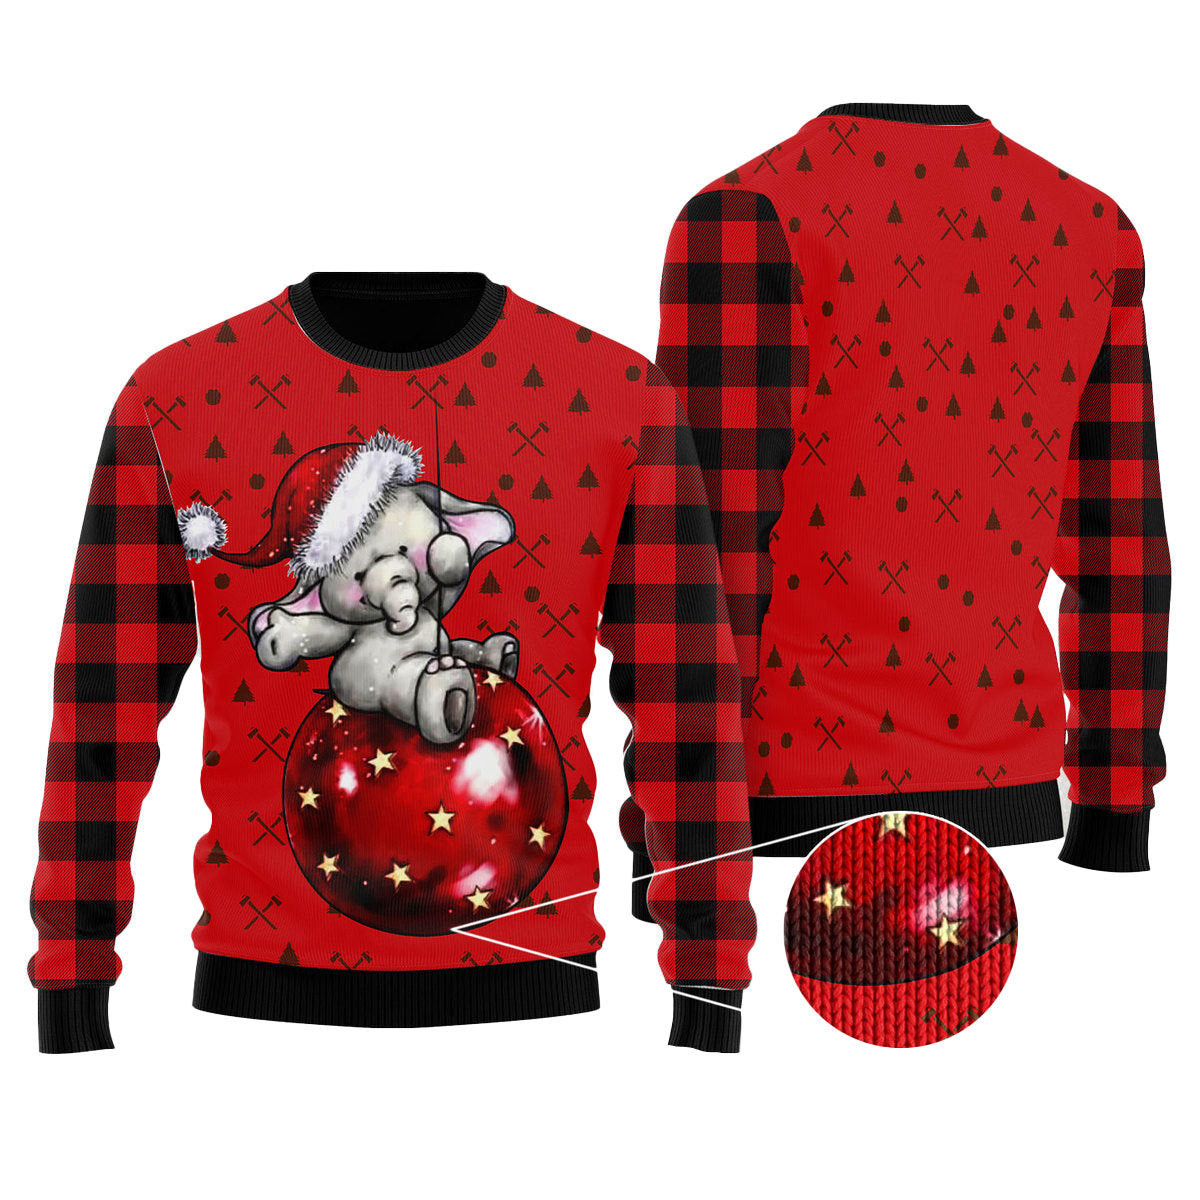 Elephant Cute Red Pattern Ugly Christmas Sweater Ugly Sweater For Men Women